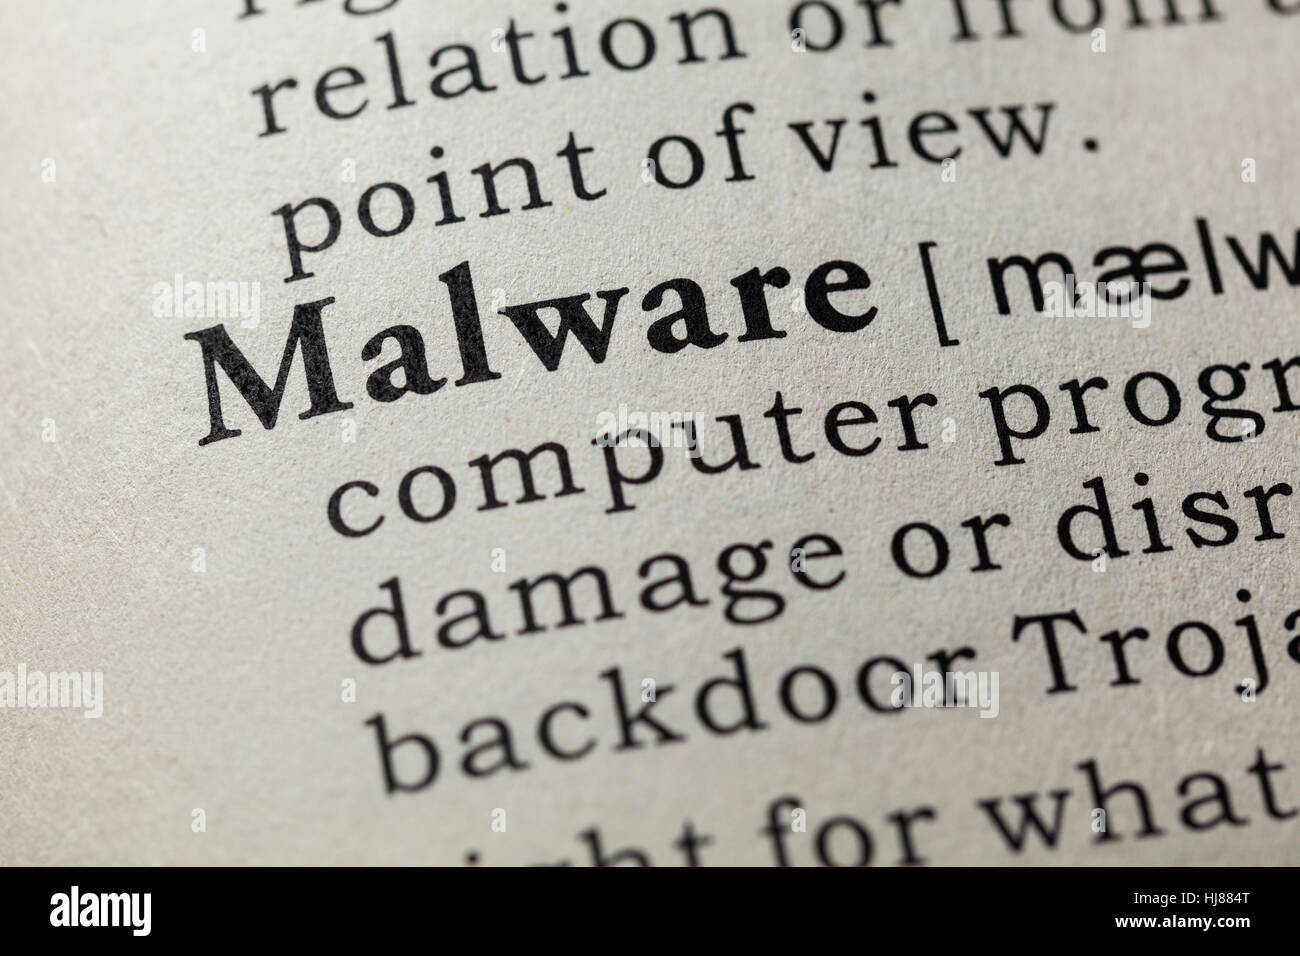 Fake Dictionary, Dictionary definition of the word Malware. including key descriptive words. Stock Photo